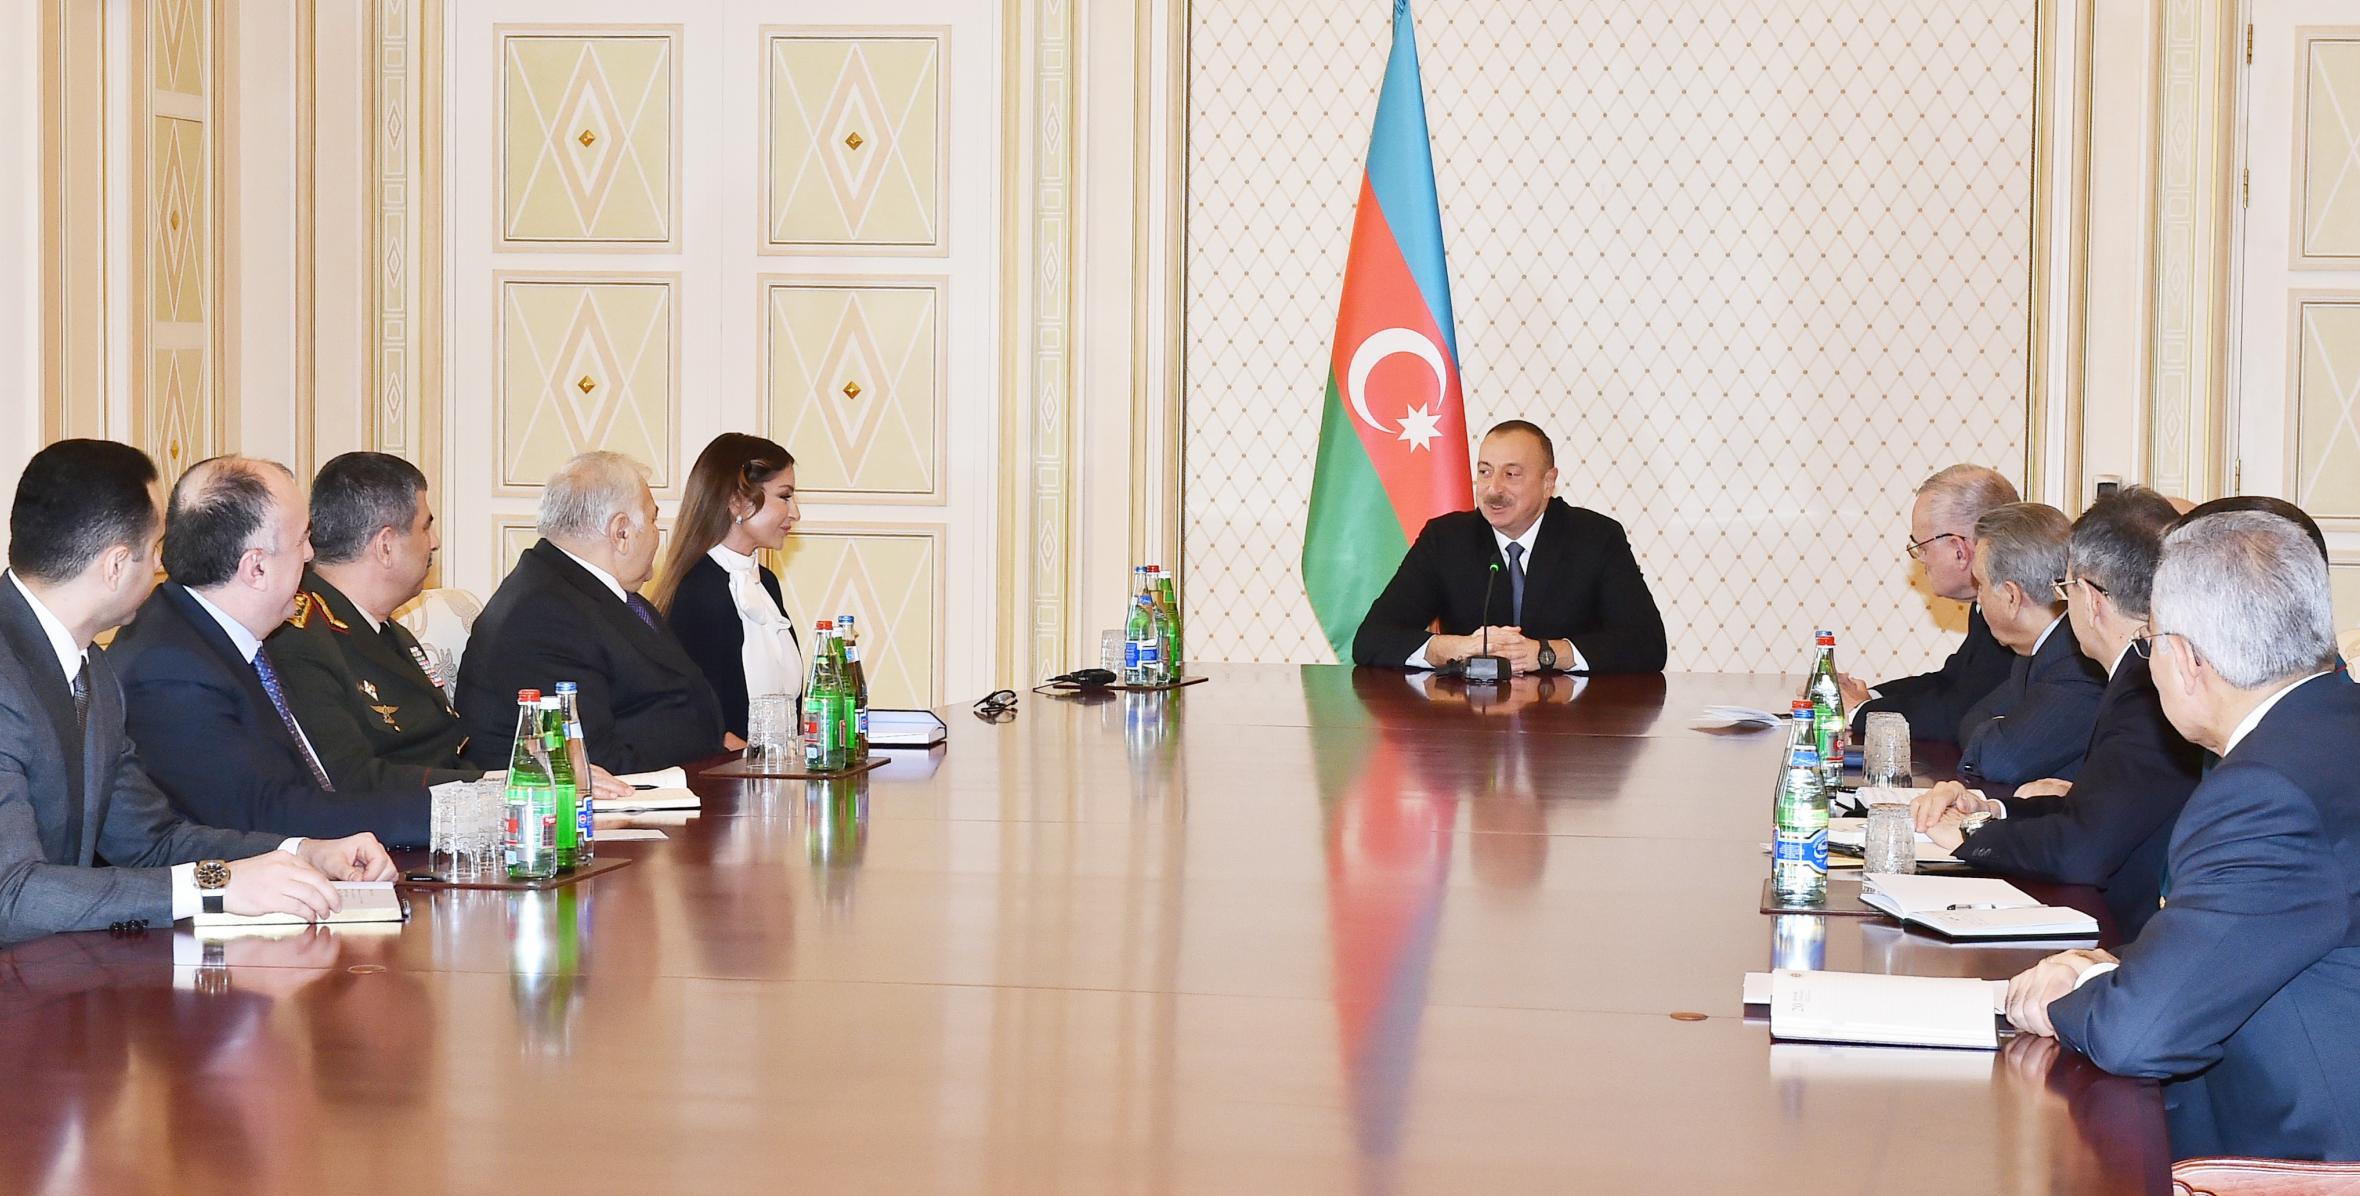 Speech by Ilham Aliyev at the meeting of Security Council